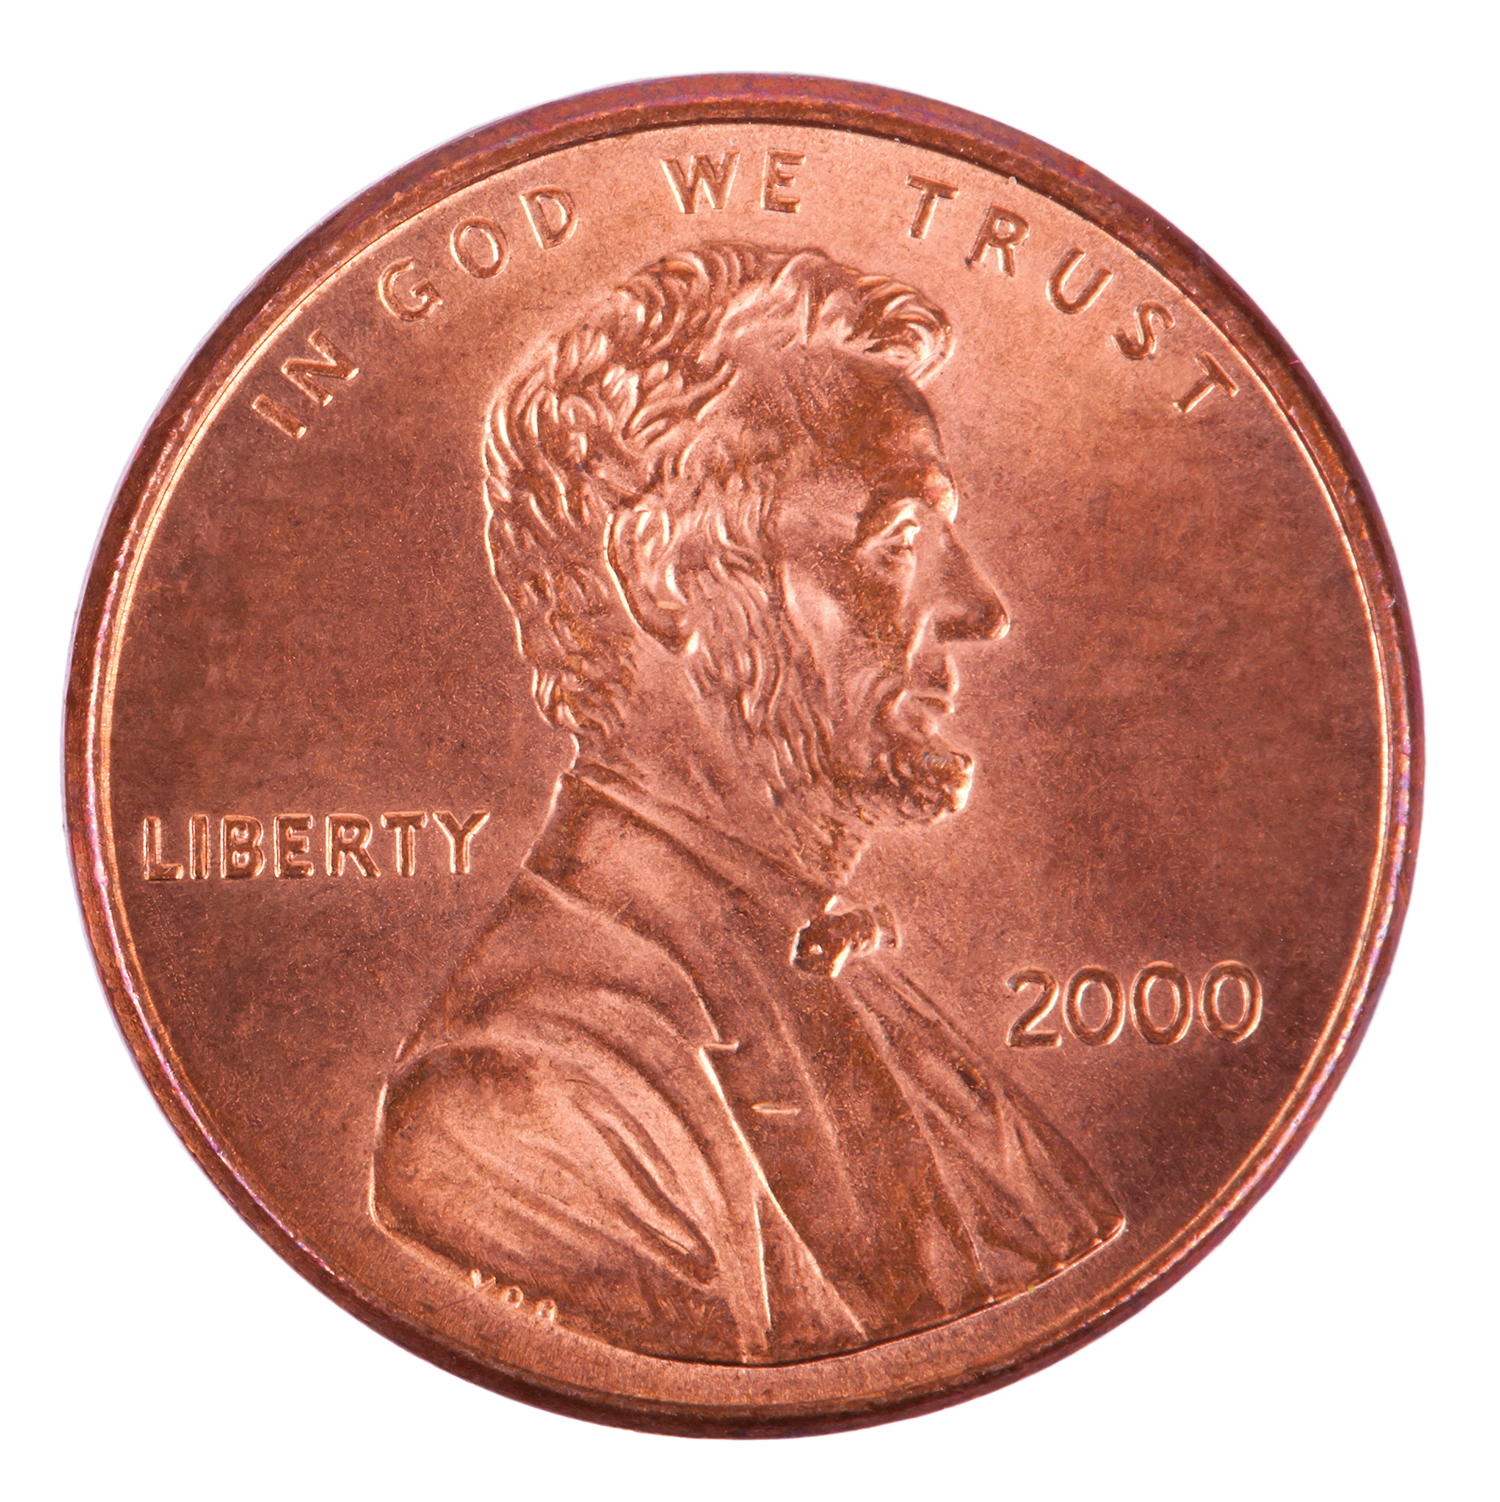 Isolated Penny – Heads Frontal